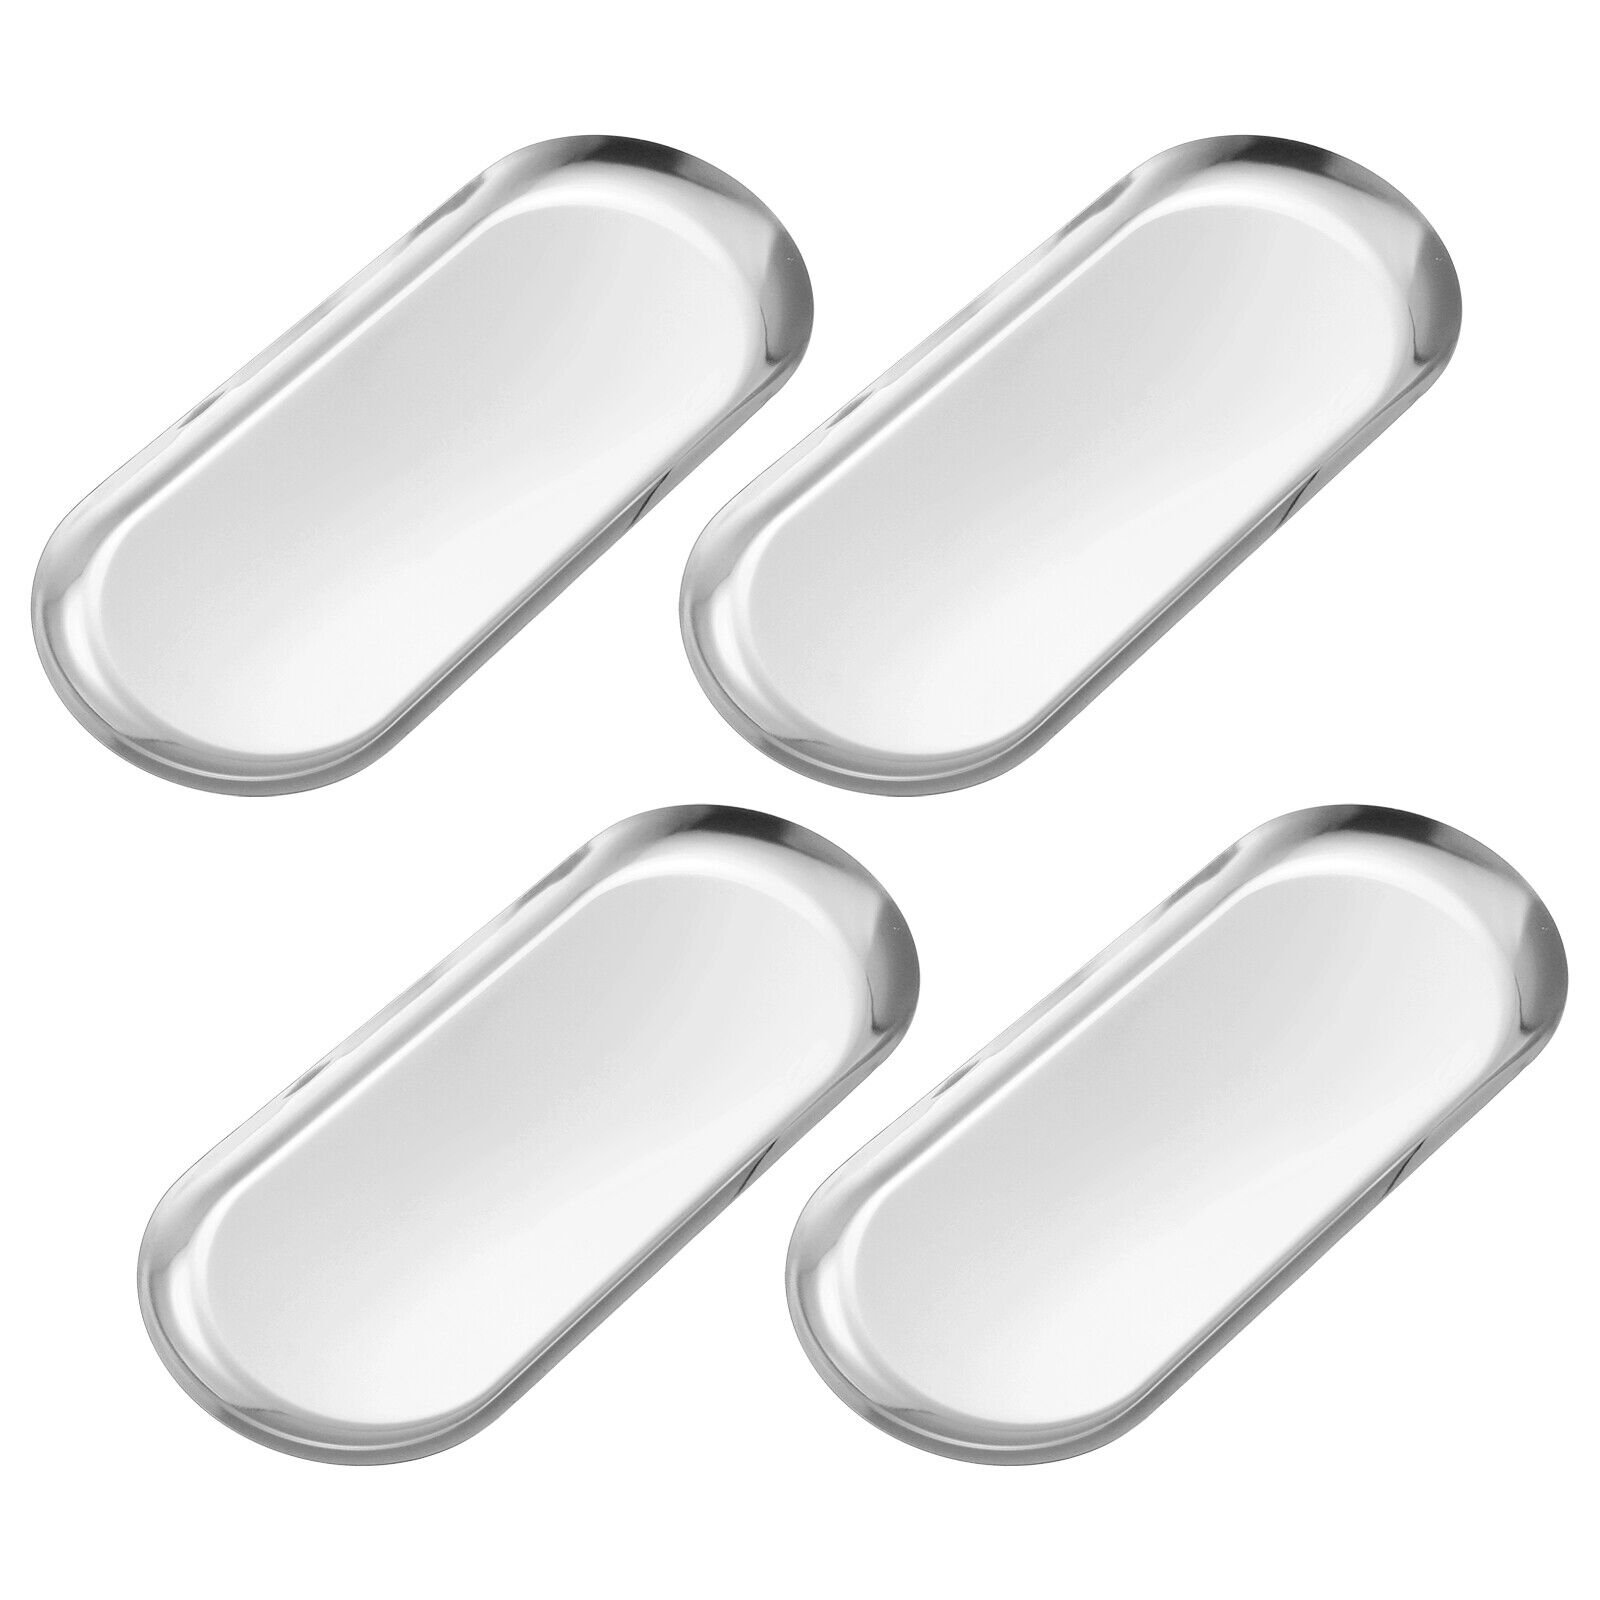 4pcs Stainless Steel Decorative Trays Silver Bathroom Cosmetic Trays (12 Inch)